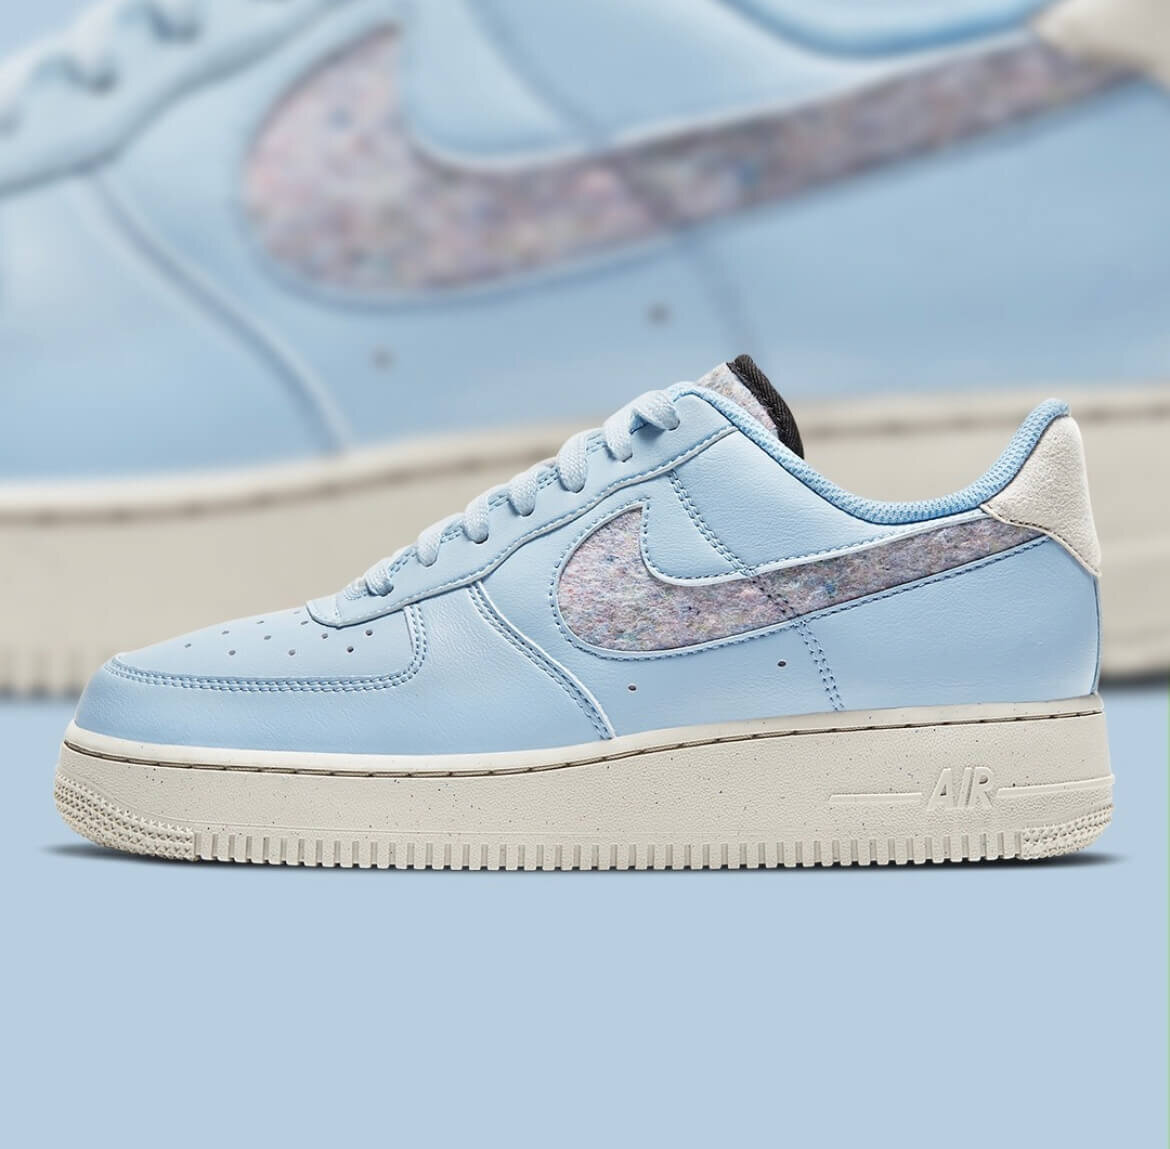 Nike Air Force 1 '07 White/Light Armory Blue